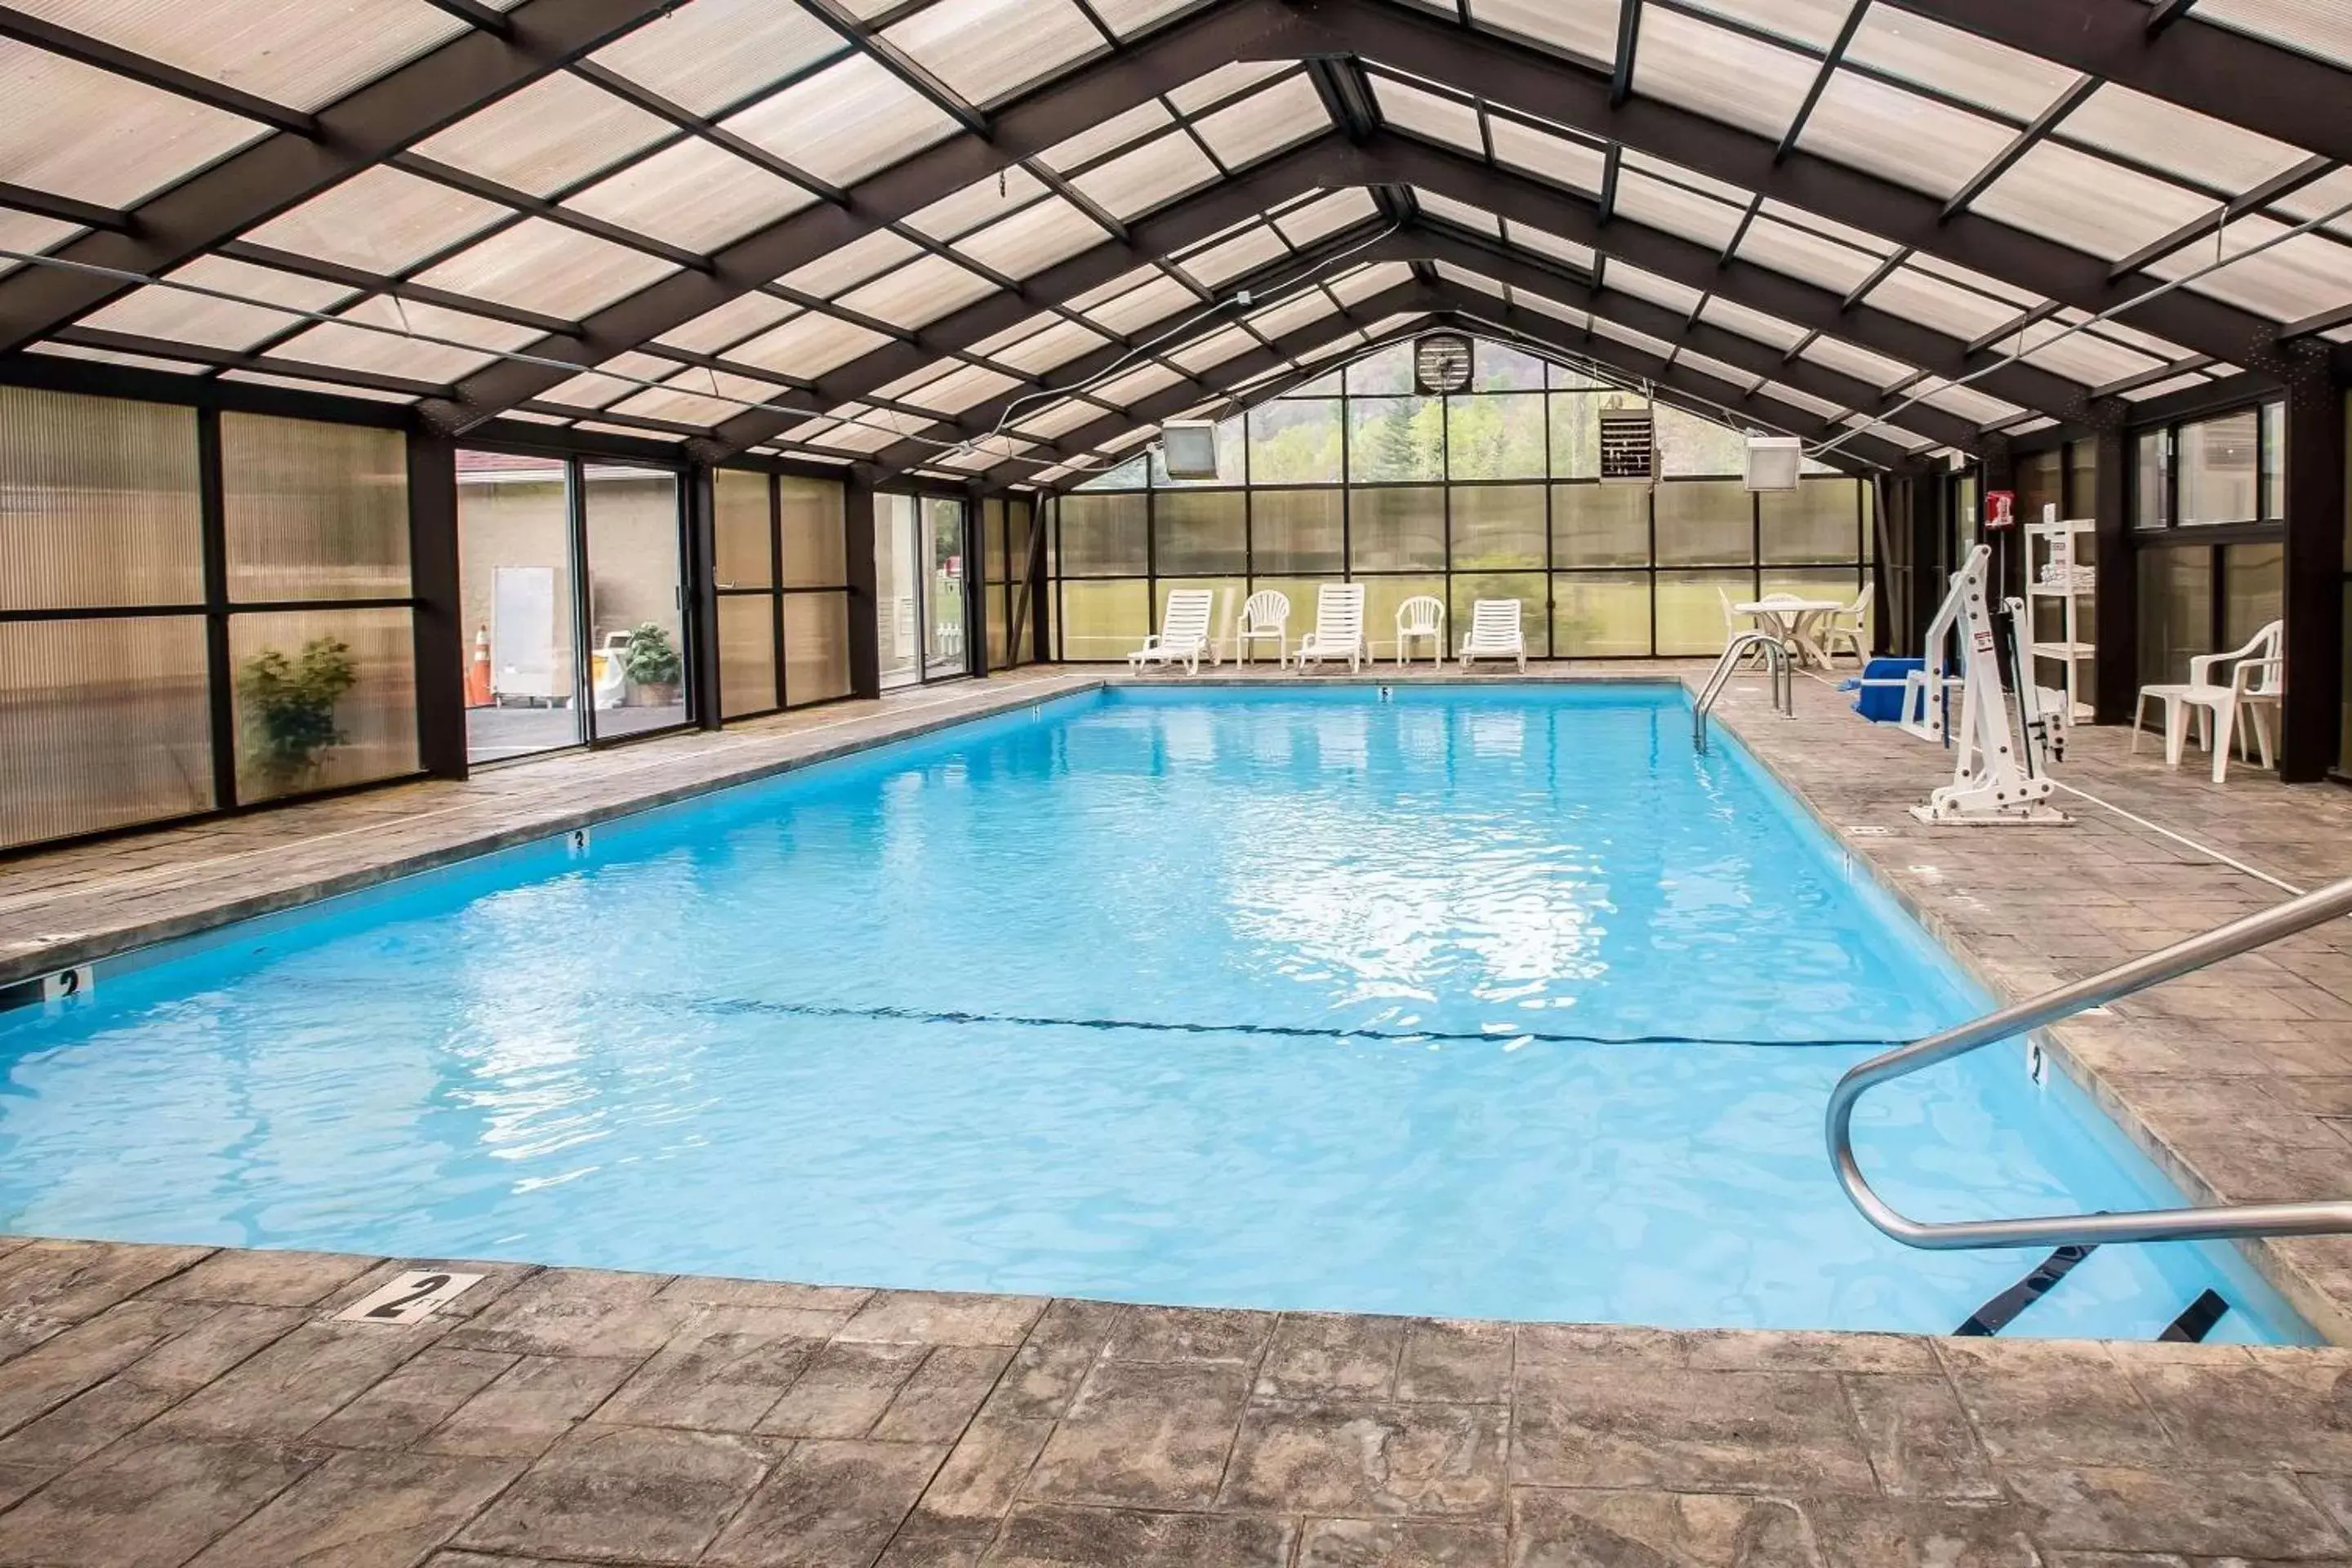 On site, Swimming Pool in Comfort Inn near Great Smoky Mountain National Park